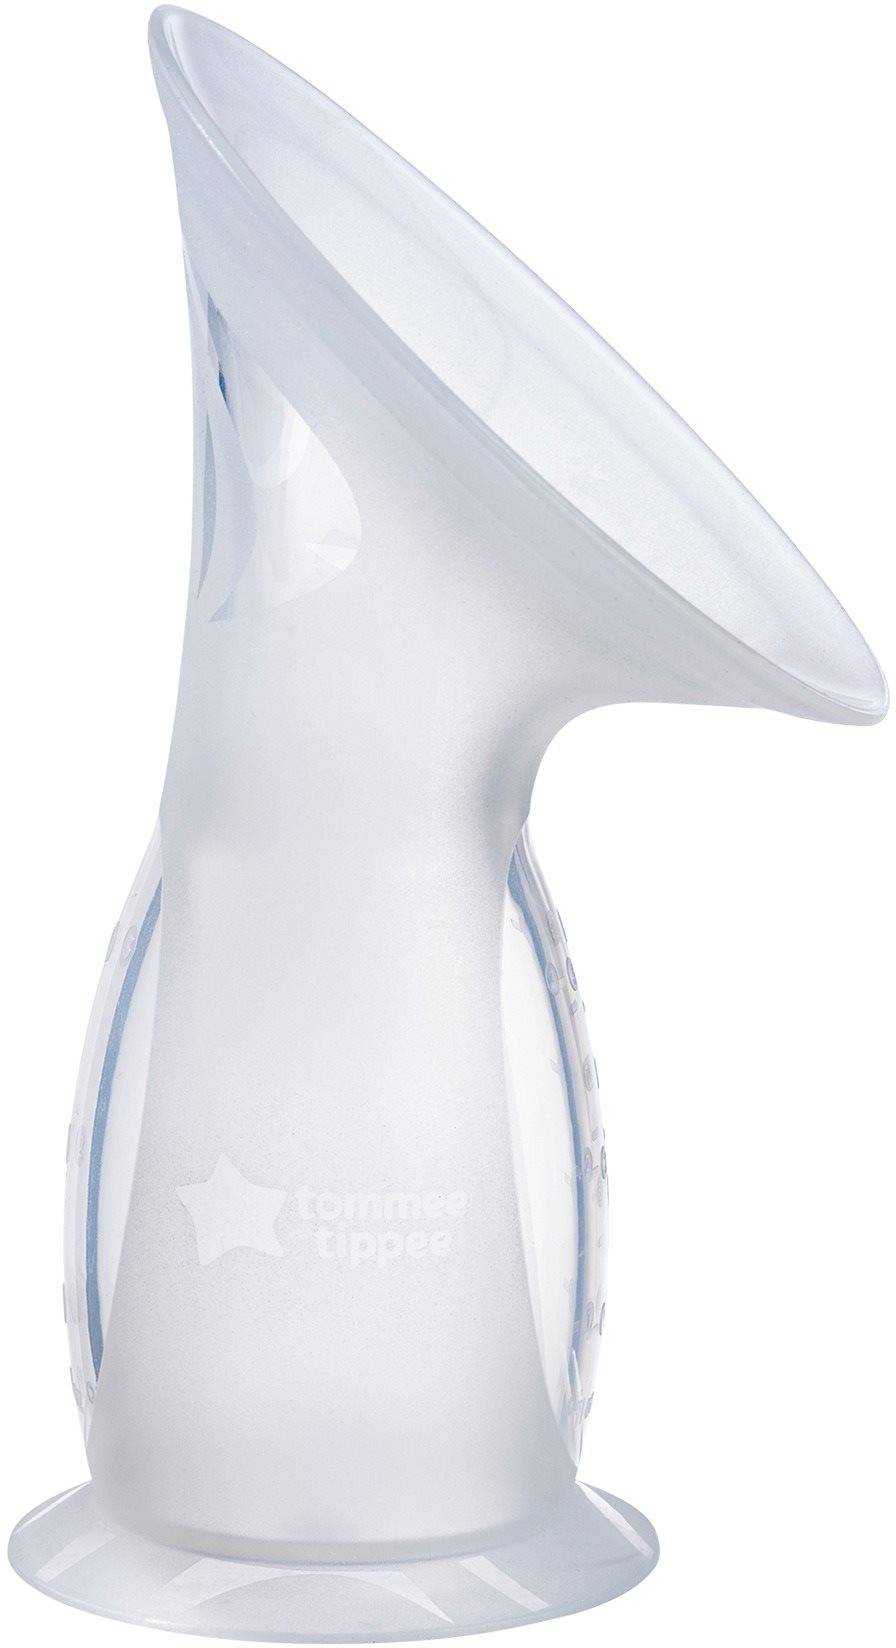 Tommee Tippee Made For Me Silikon